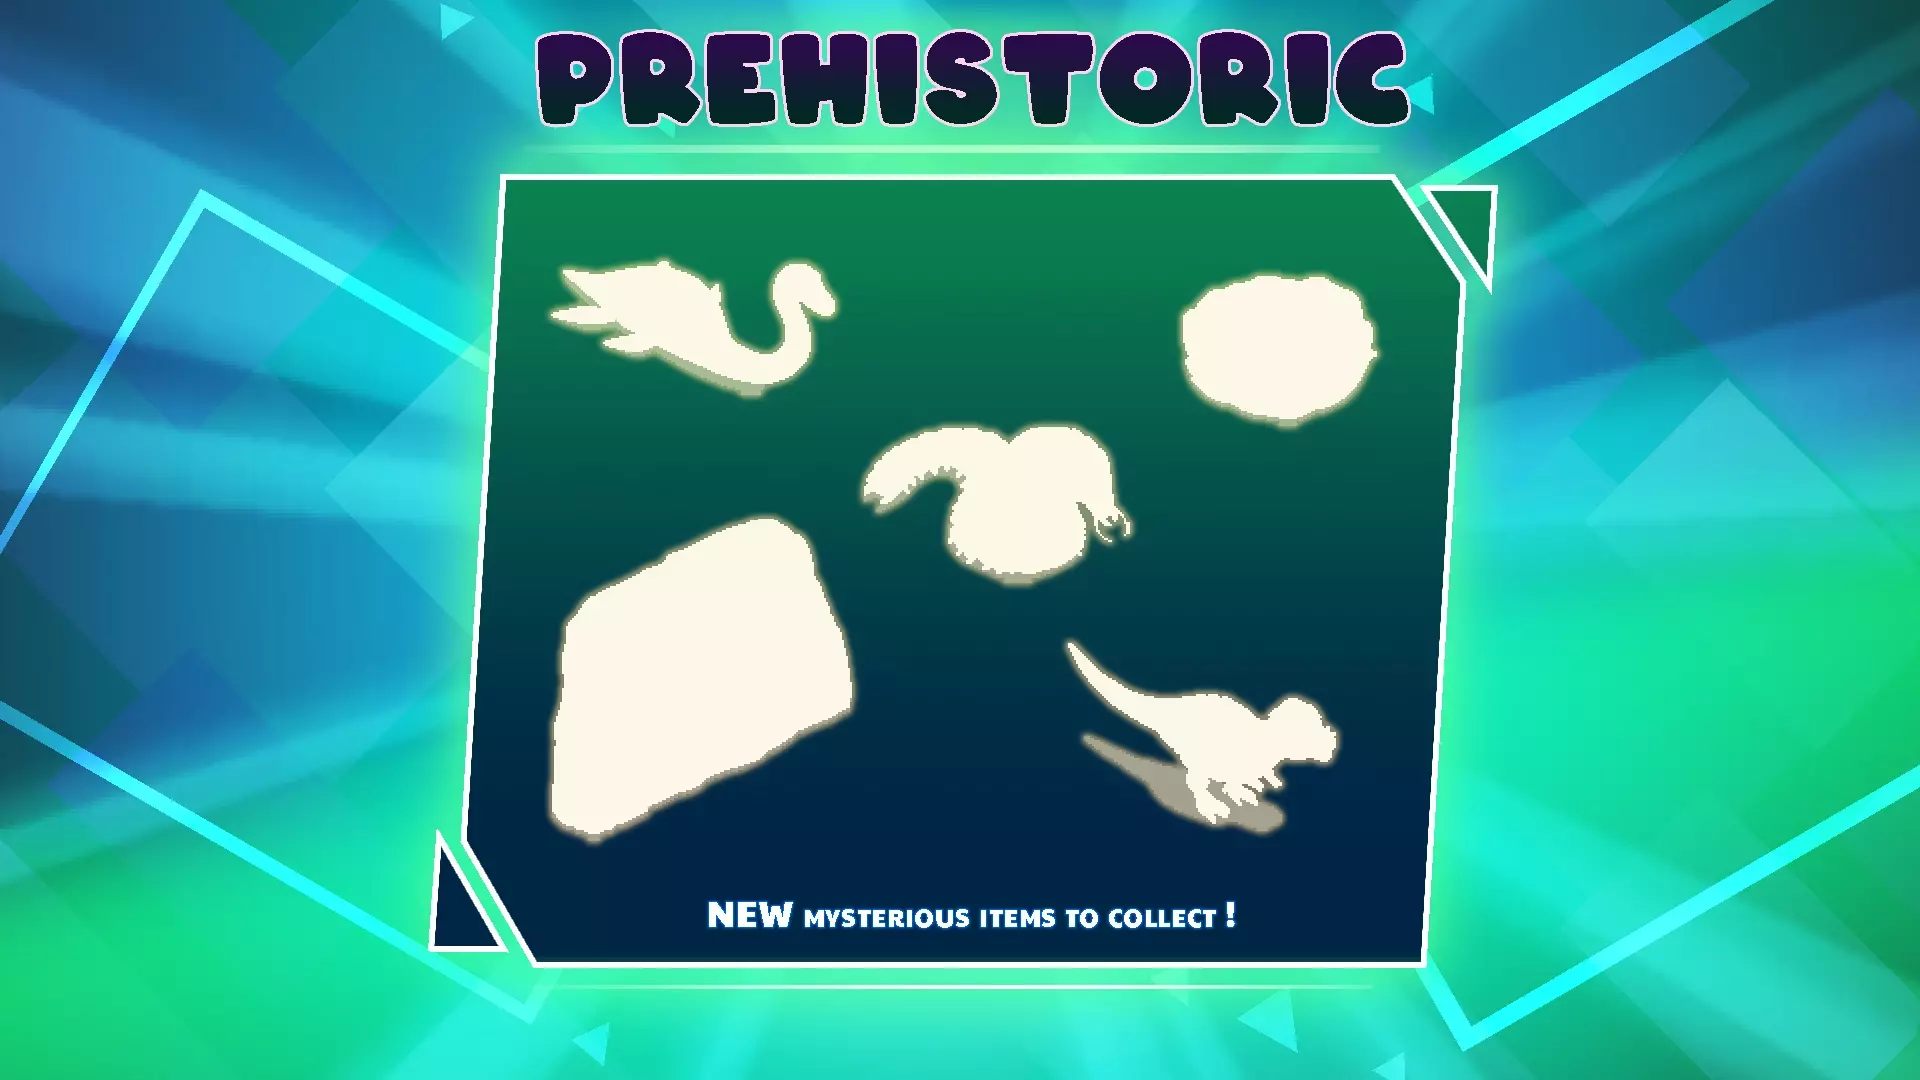 PewDiePie's Tuber Simulator Prehistory background featuring item silhouettes titled "PREHISTORY" with subtext "NEW MYSTERIOUS ITEMS TO COLLECT!"